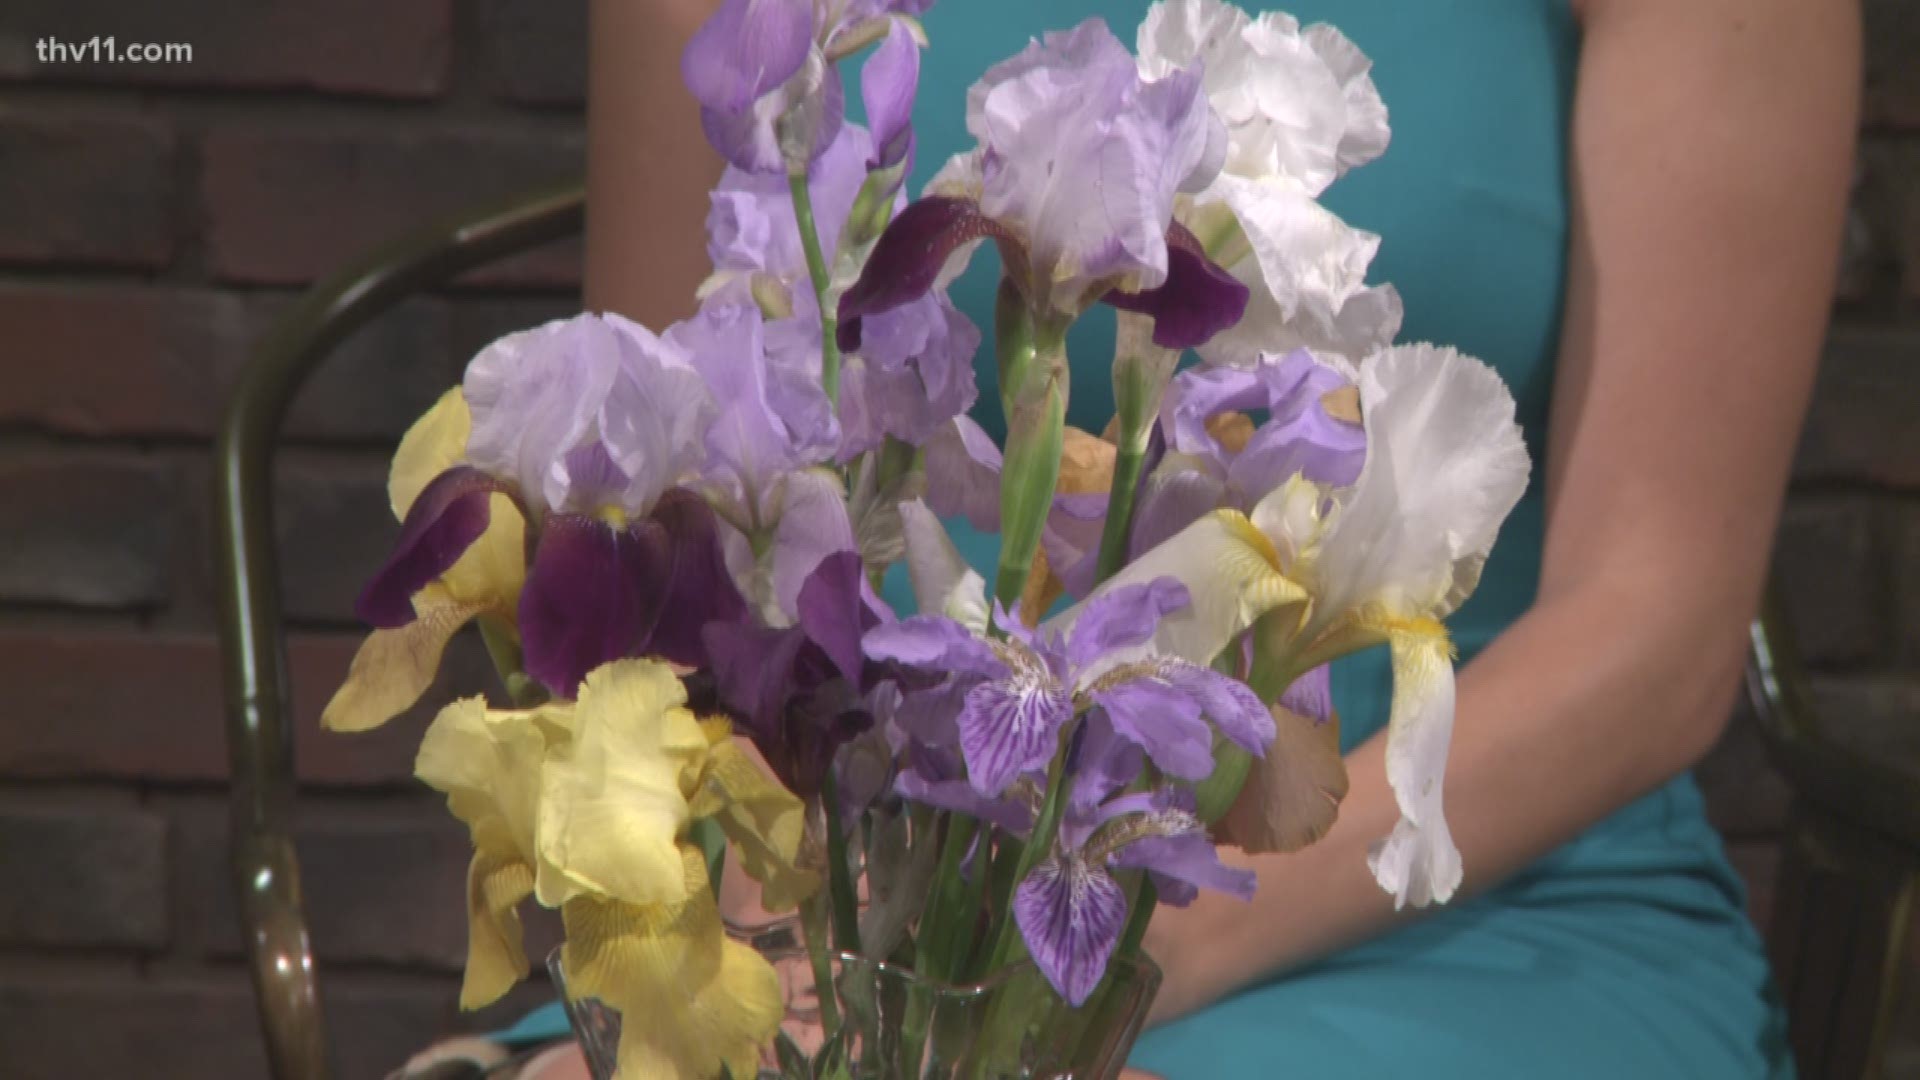 The first Mountain View Iris Festival is kicking off from May 4 to 6. Check out the full schedule of events here.